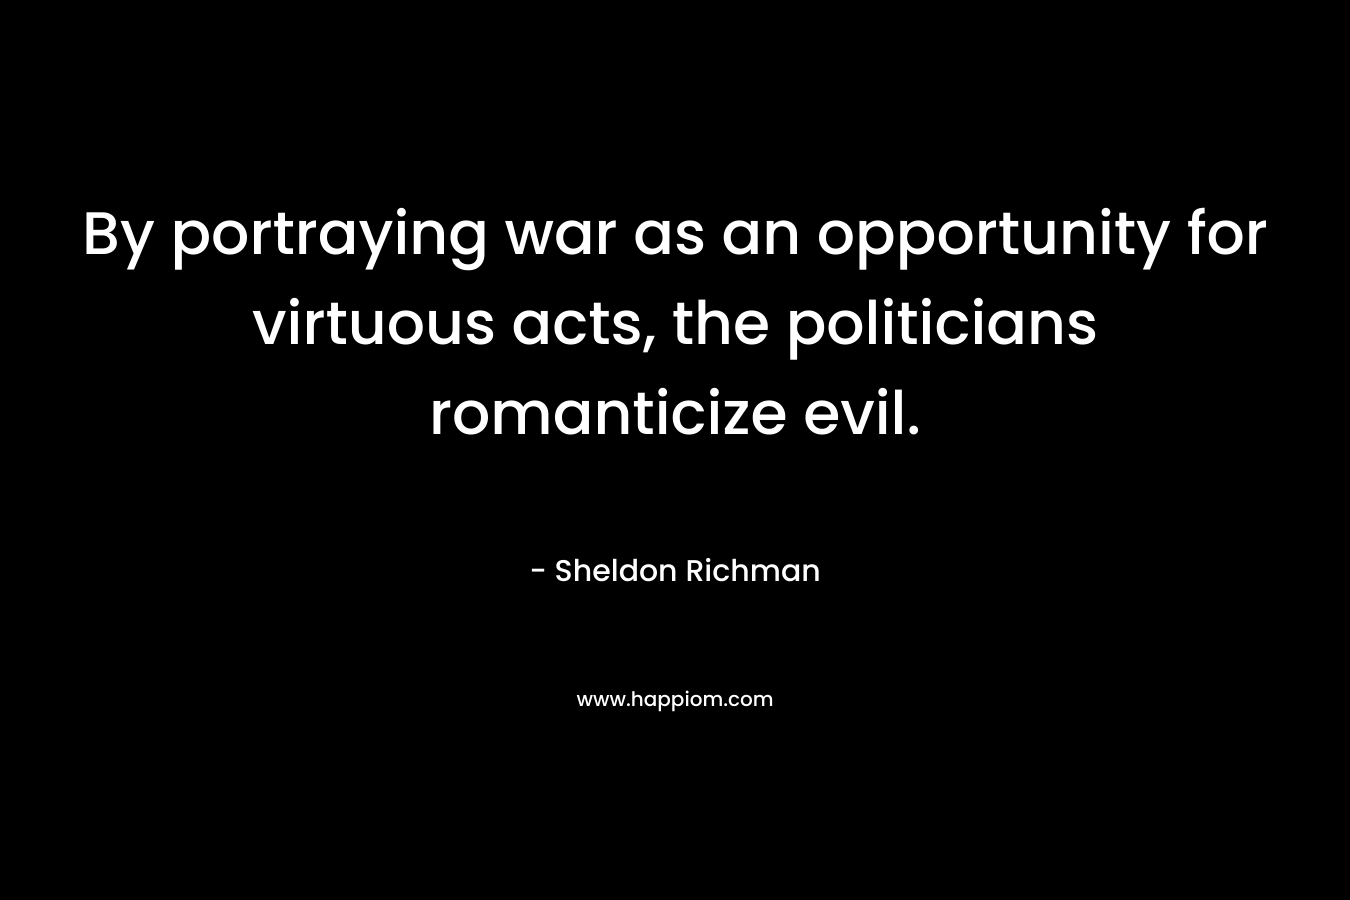 By portraying war as an opportunity for virtuous acts, the politicians romanticize evil. – Sheldon Richman